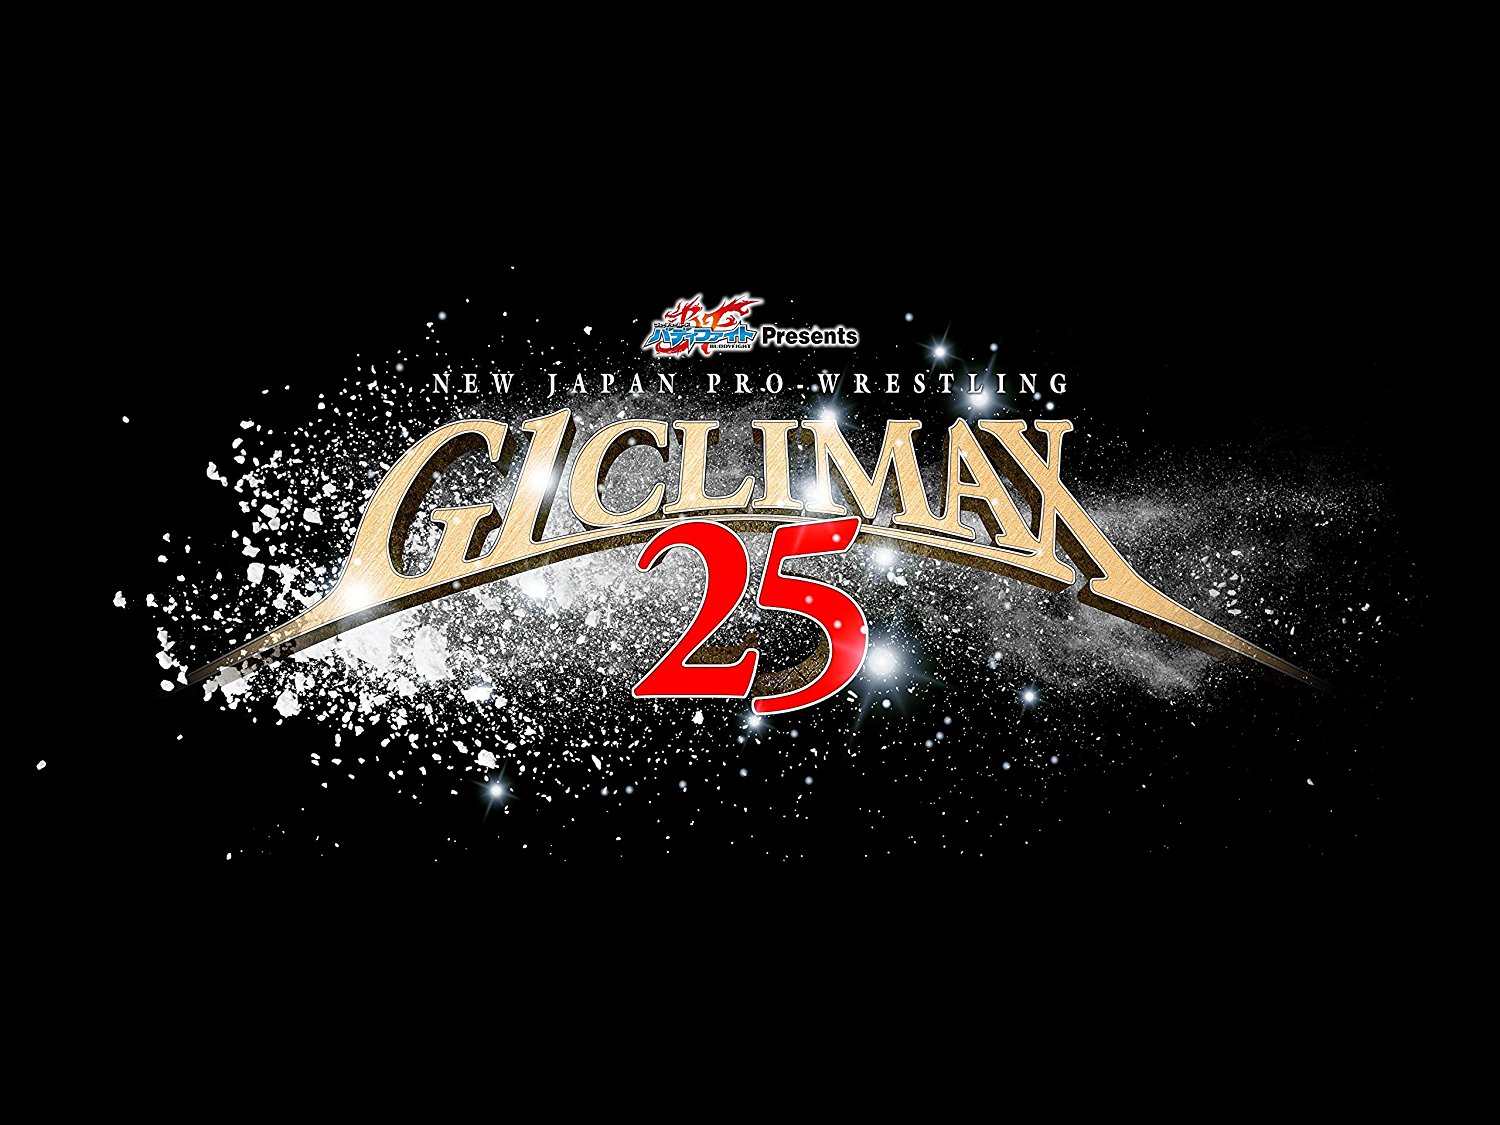 G1 CLIMAX 2015